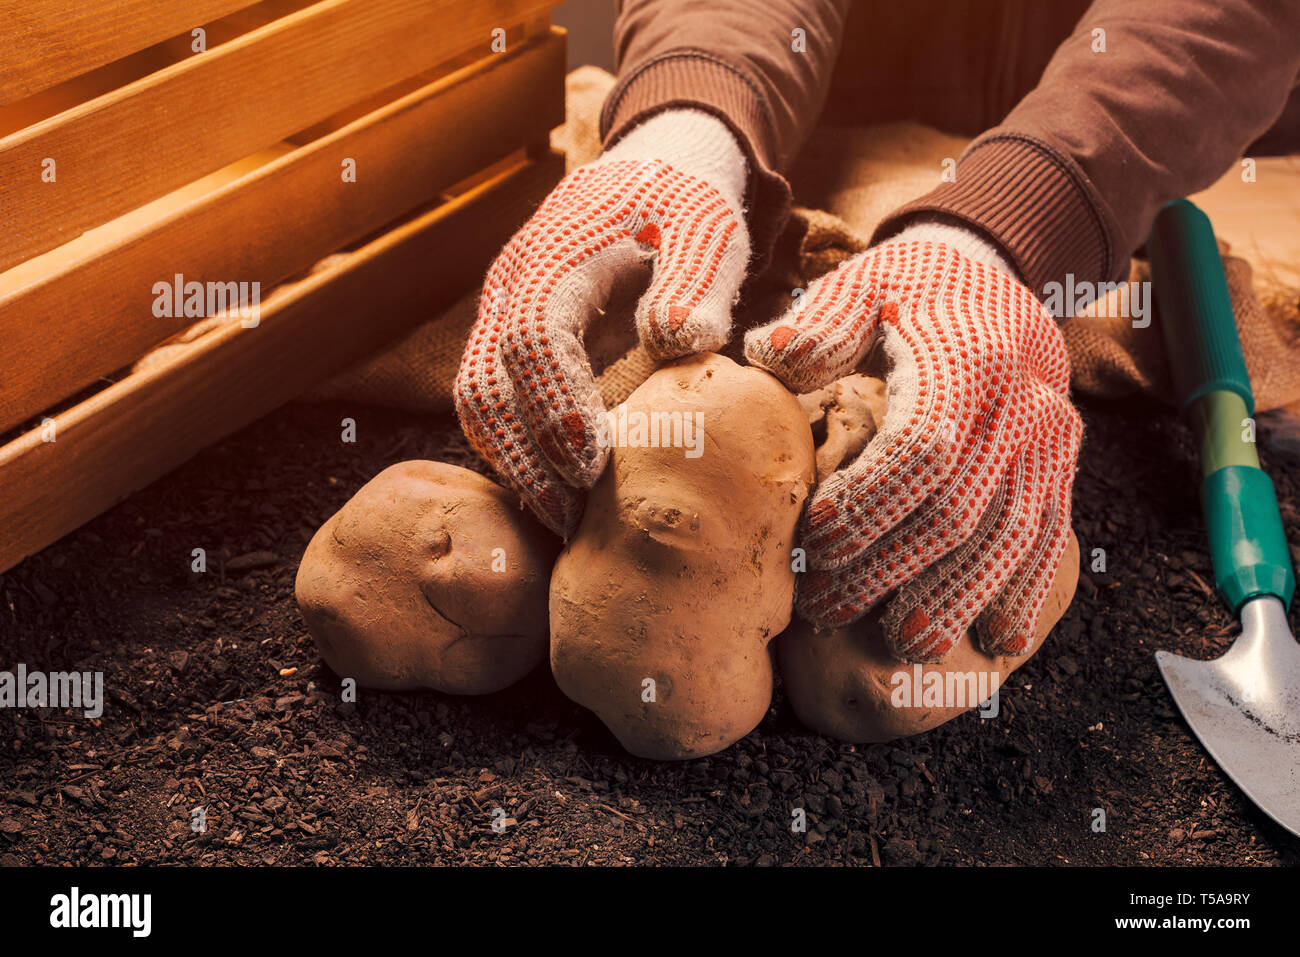 Proud farmer holding harvested organic potato tuber in hands, locally grown food production concept Stock Photo